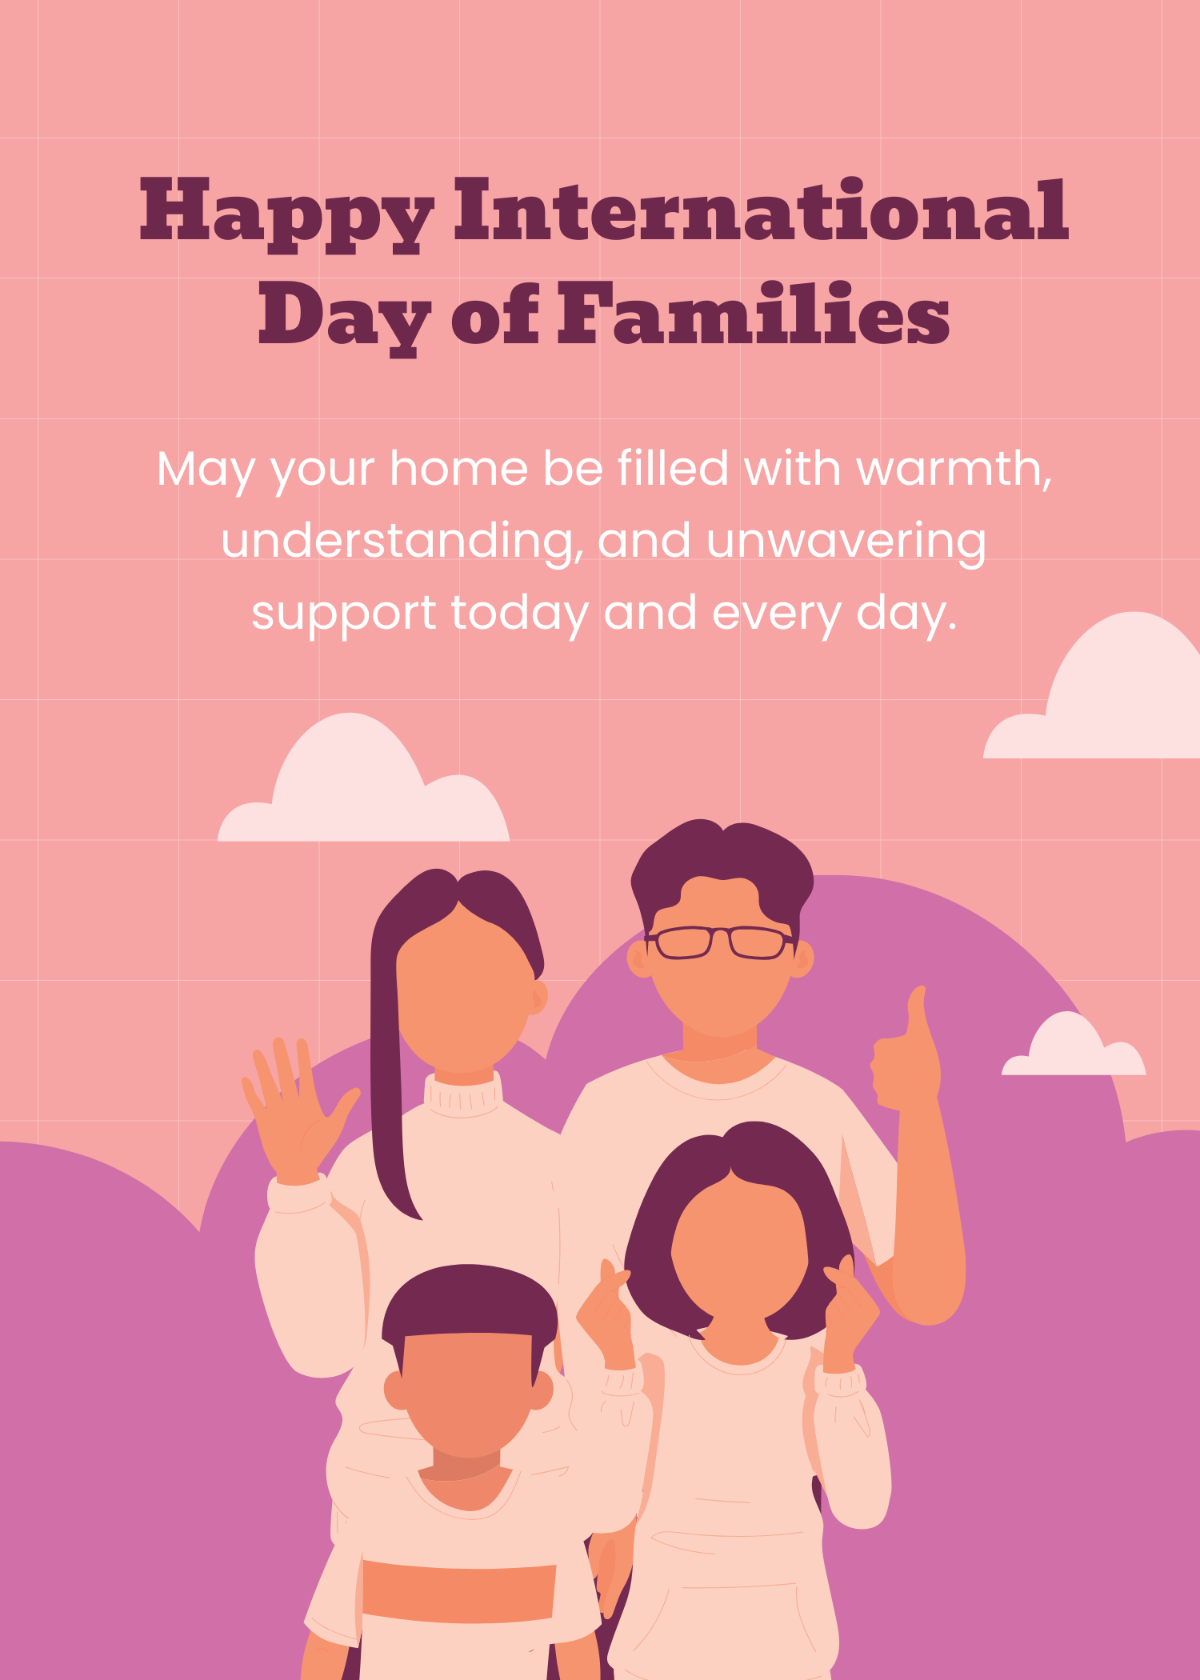 Free International Day of Families Wishes Template